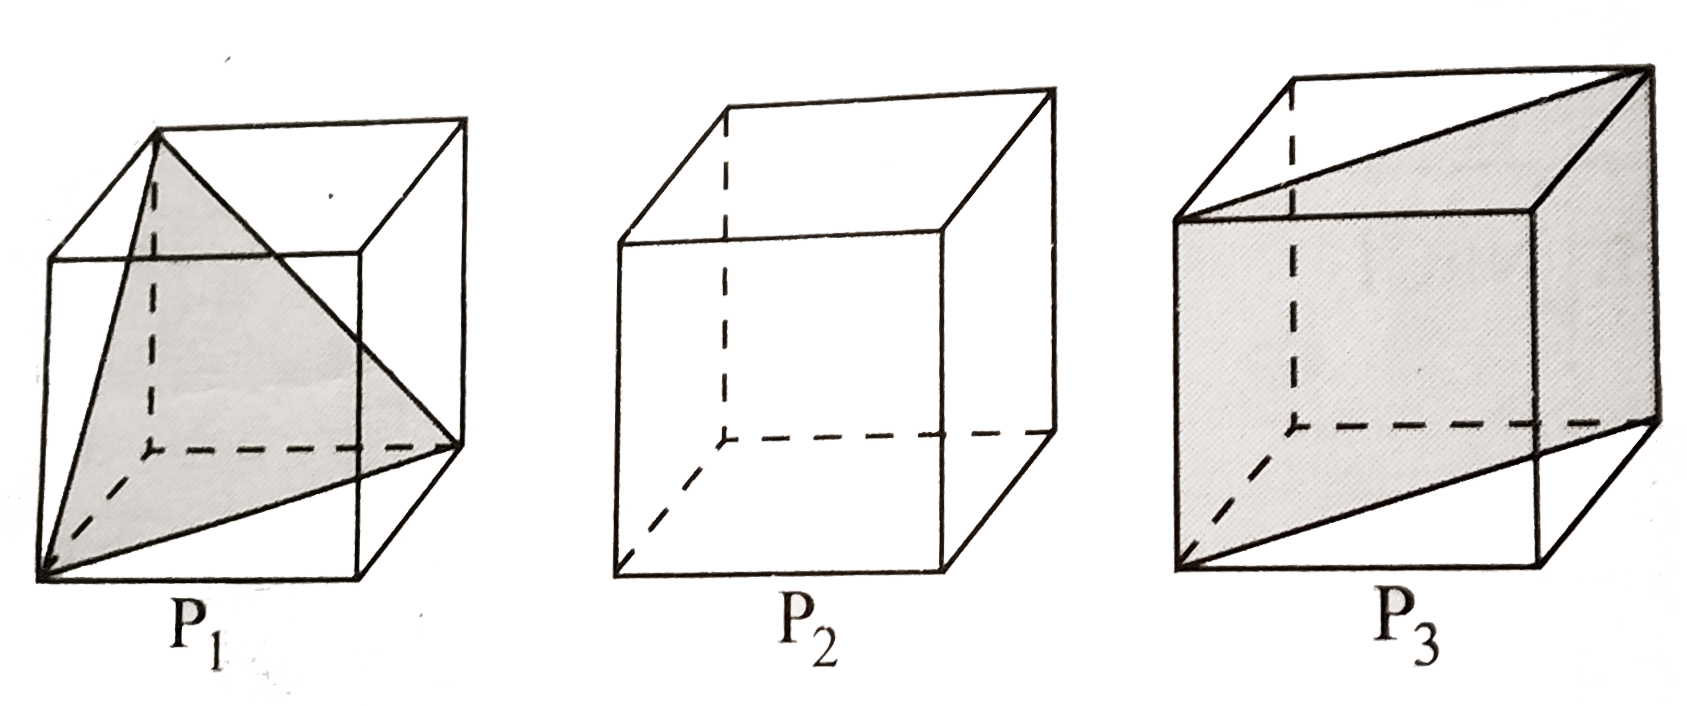 Following three planes (P(1), P(2), P(3)) in an fcc unit cell are shown in the figure below. Consider the following statements and choose the correct option/options that follow:    
 (a)P(1) contains no three-dimensional voids.
 (b)P(2) contains only octahedral voids.
 (c)P(3) contains both octahedral and tetrahedral voids 
 (d)All of these